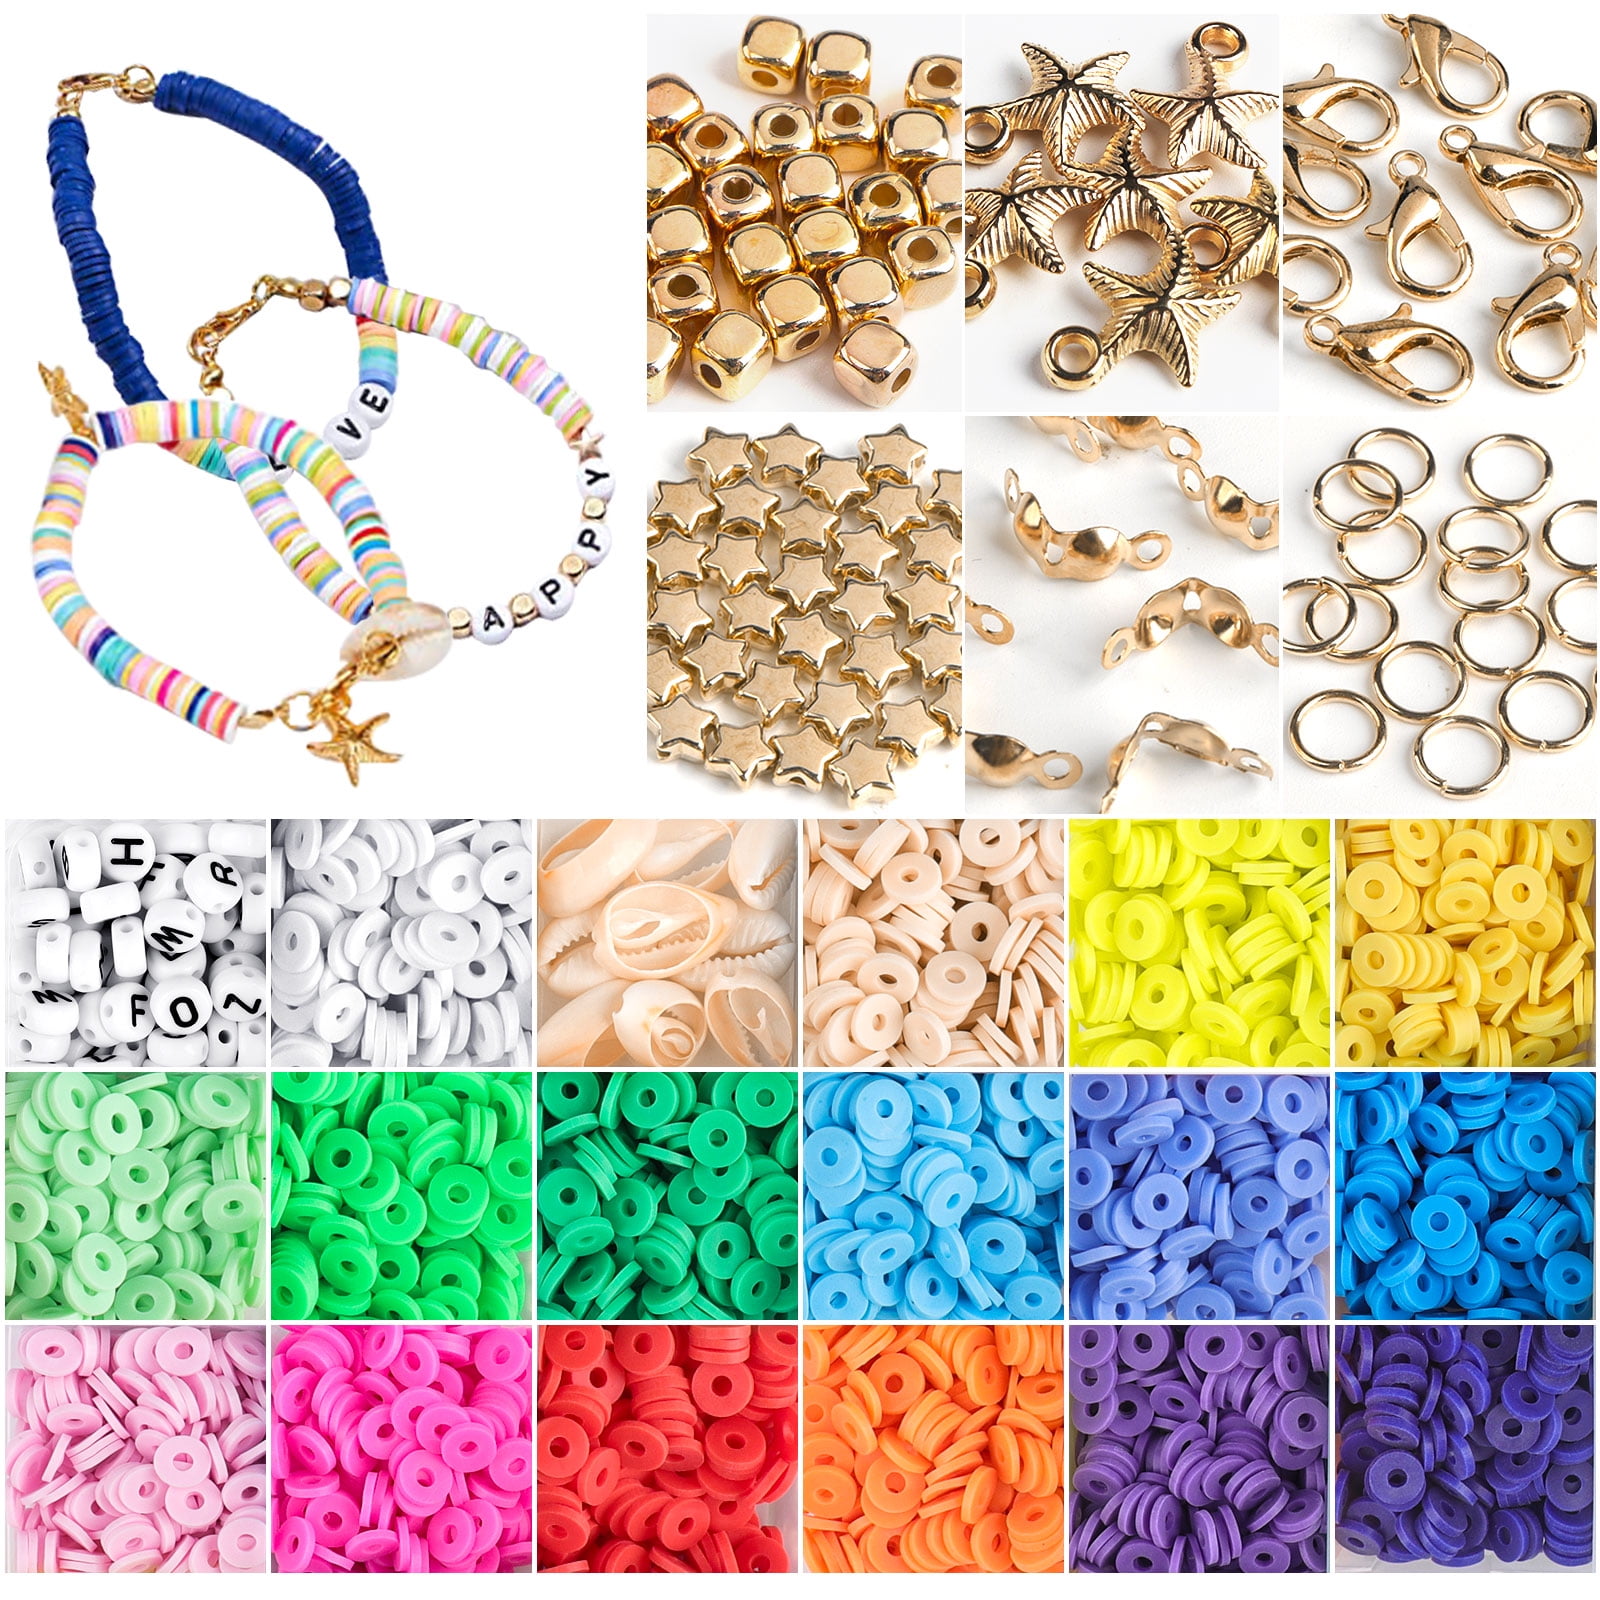 Korilave 4600 Clay Beads for Bracelets Making Kit, 20 Colors Flat Round Polymer 6mm Beads